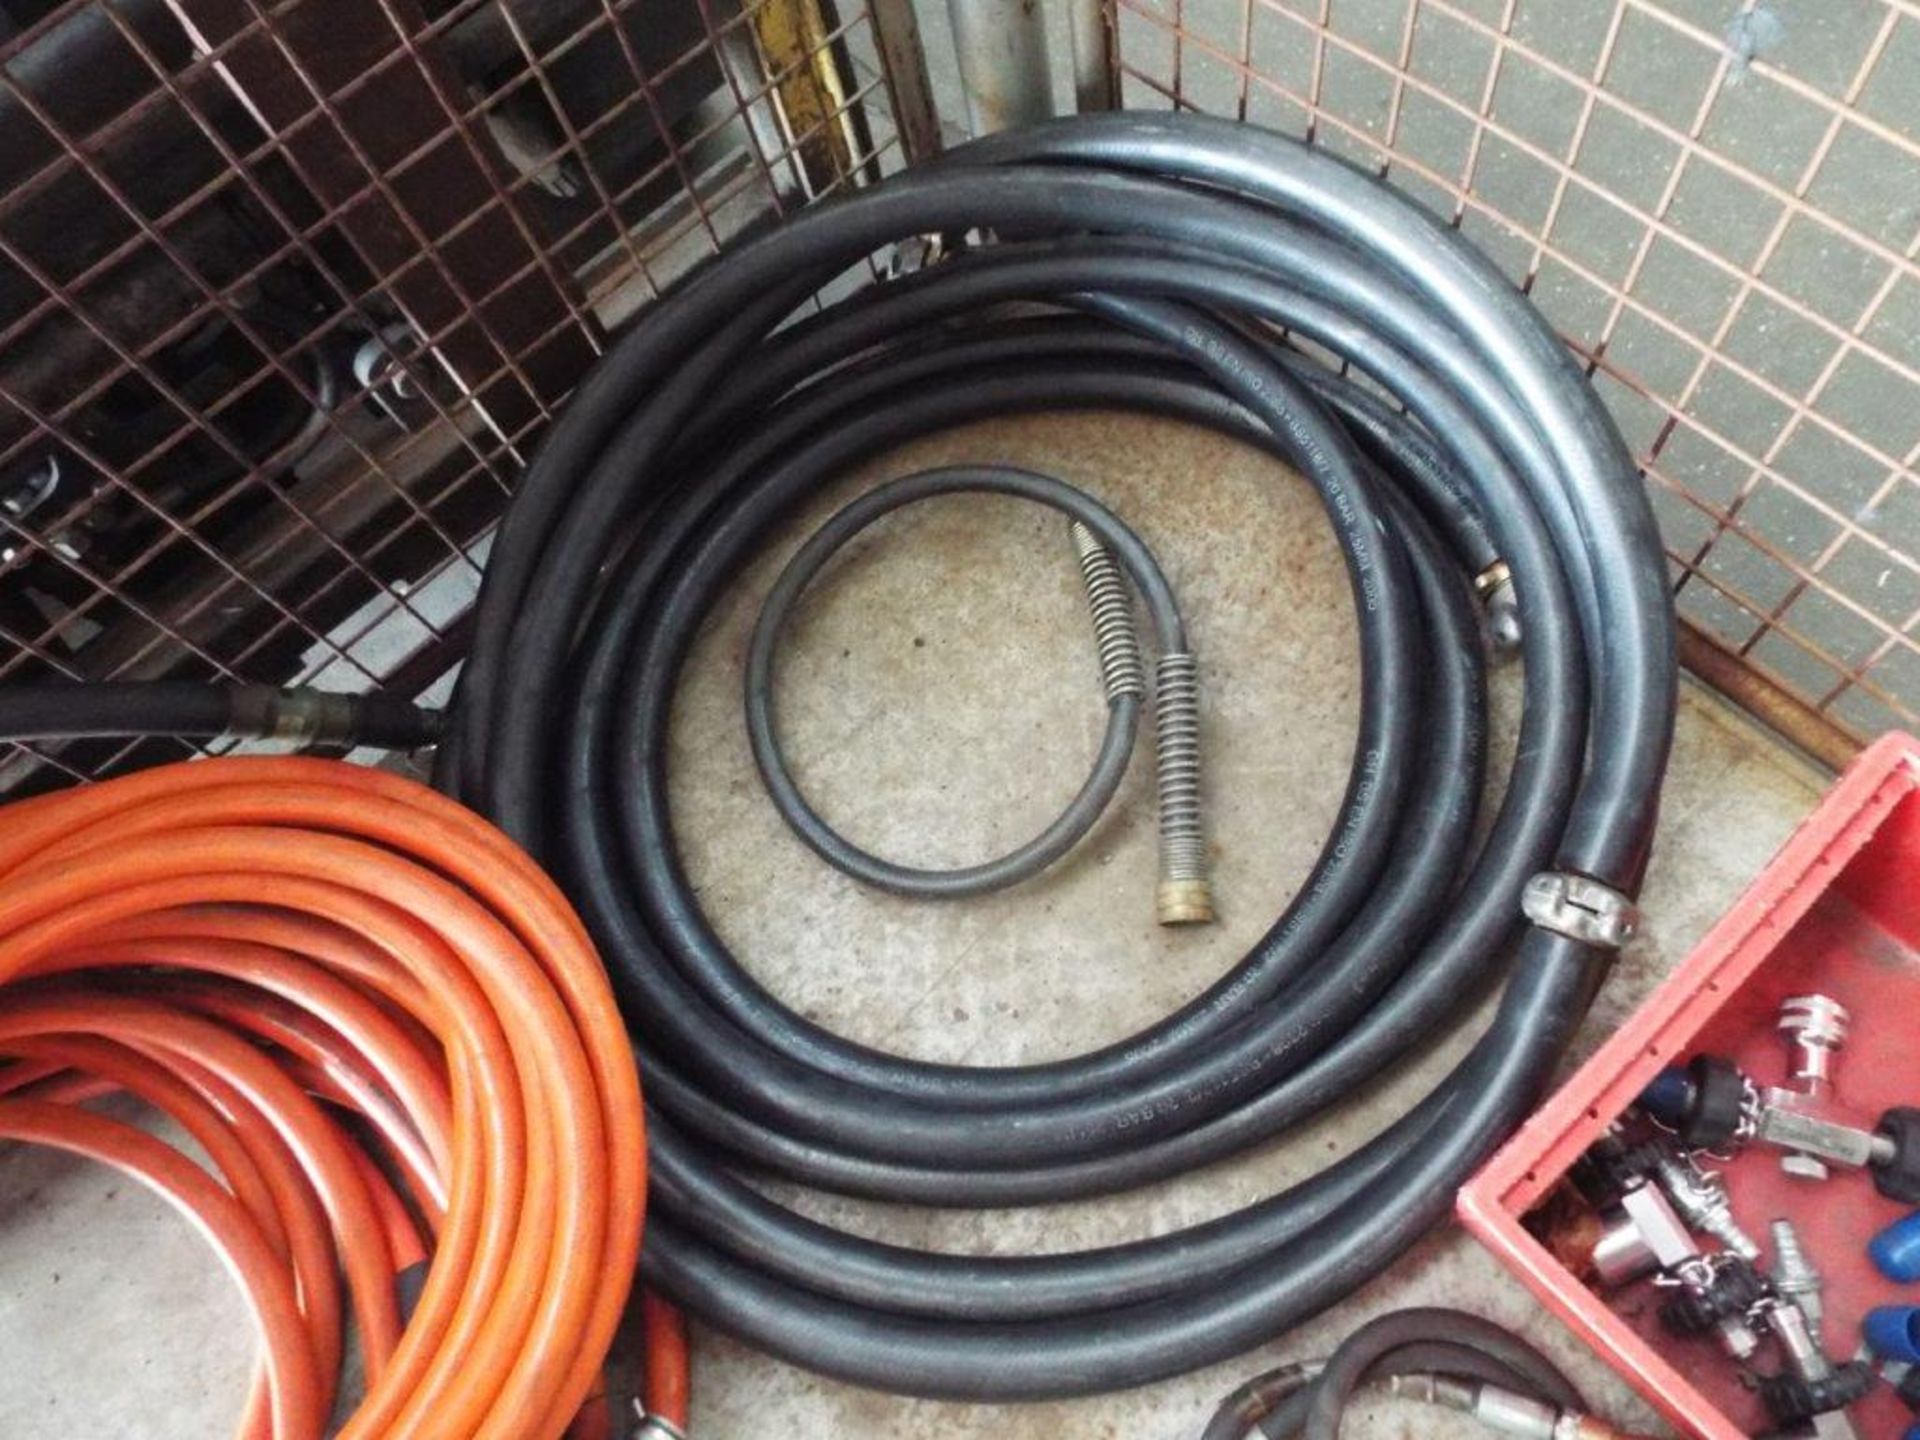 Mixed Stillage of Air Hoses and Couplings - Image 3 of 6